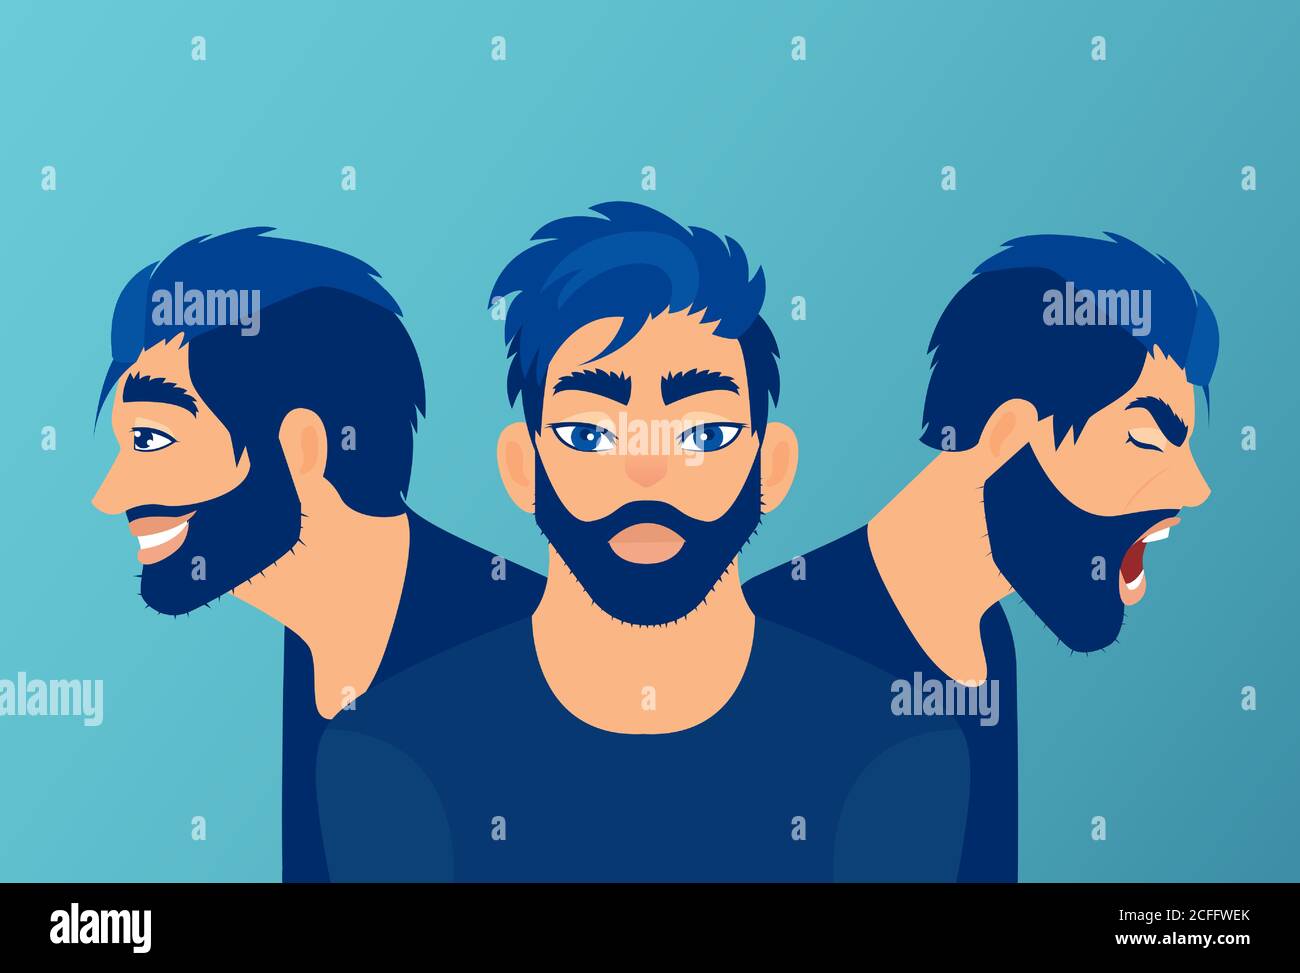 Vector of a young man with mood swings, bipolar disorder expressing anger and happiness Stock Vector